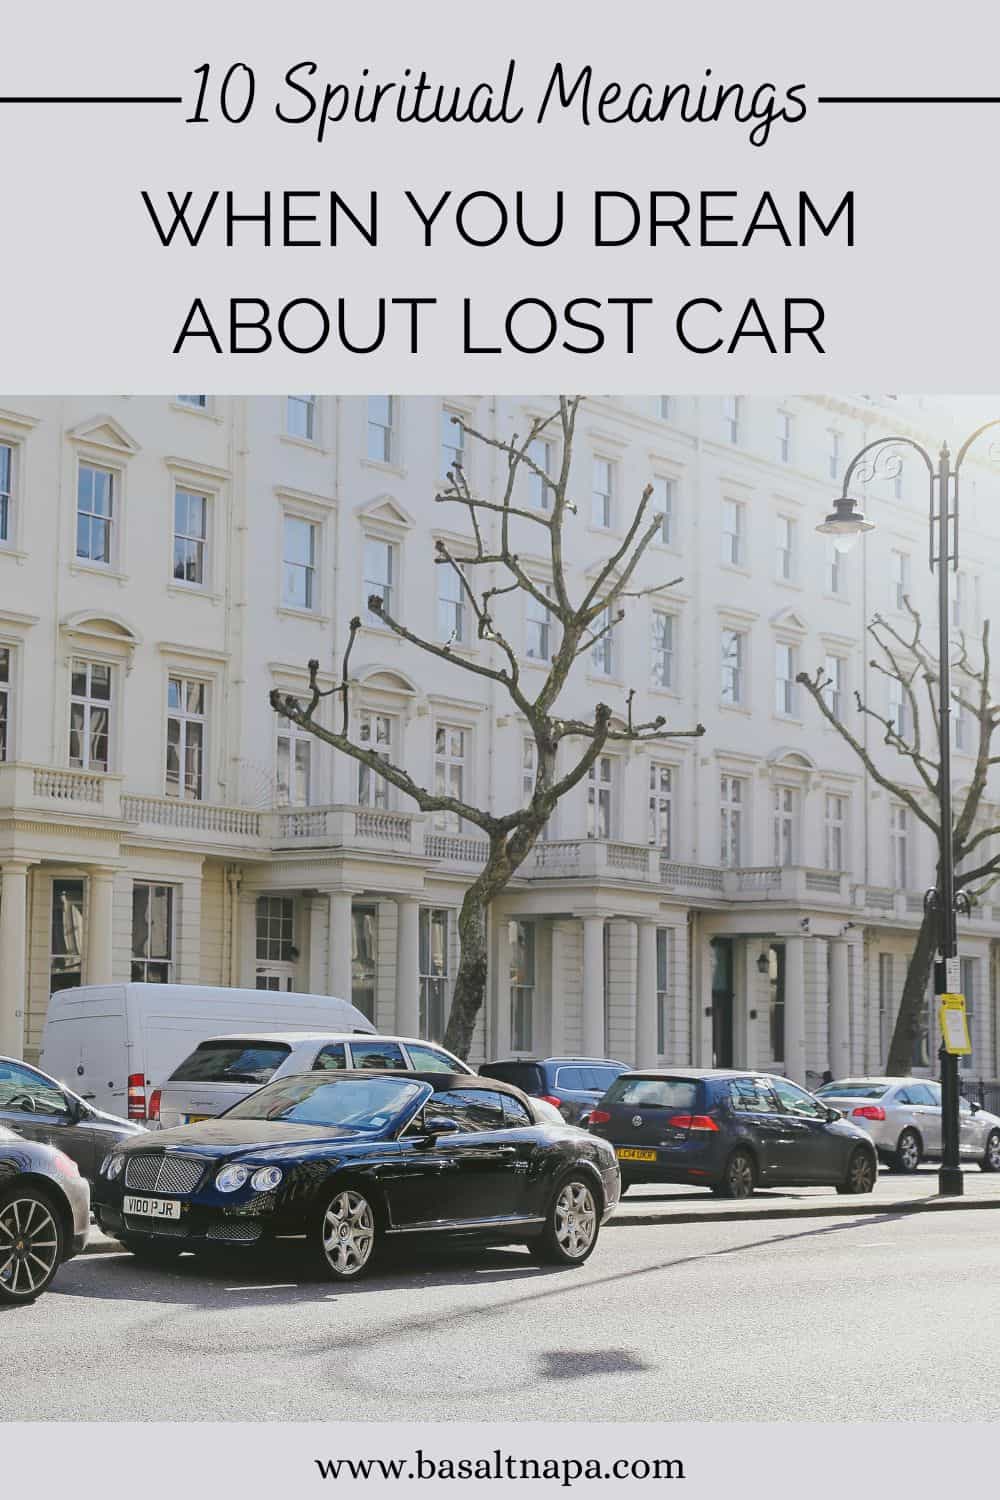 10 Spiritual Meanings When You Dream About Lost Car